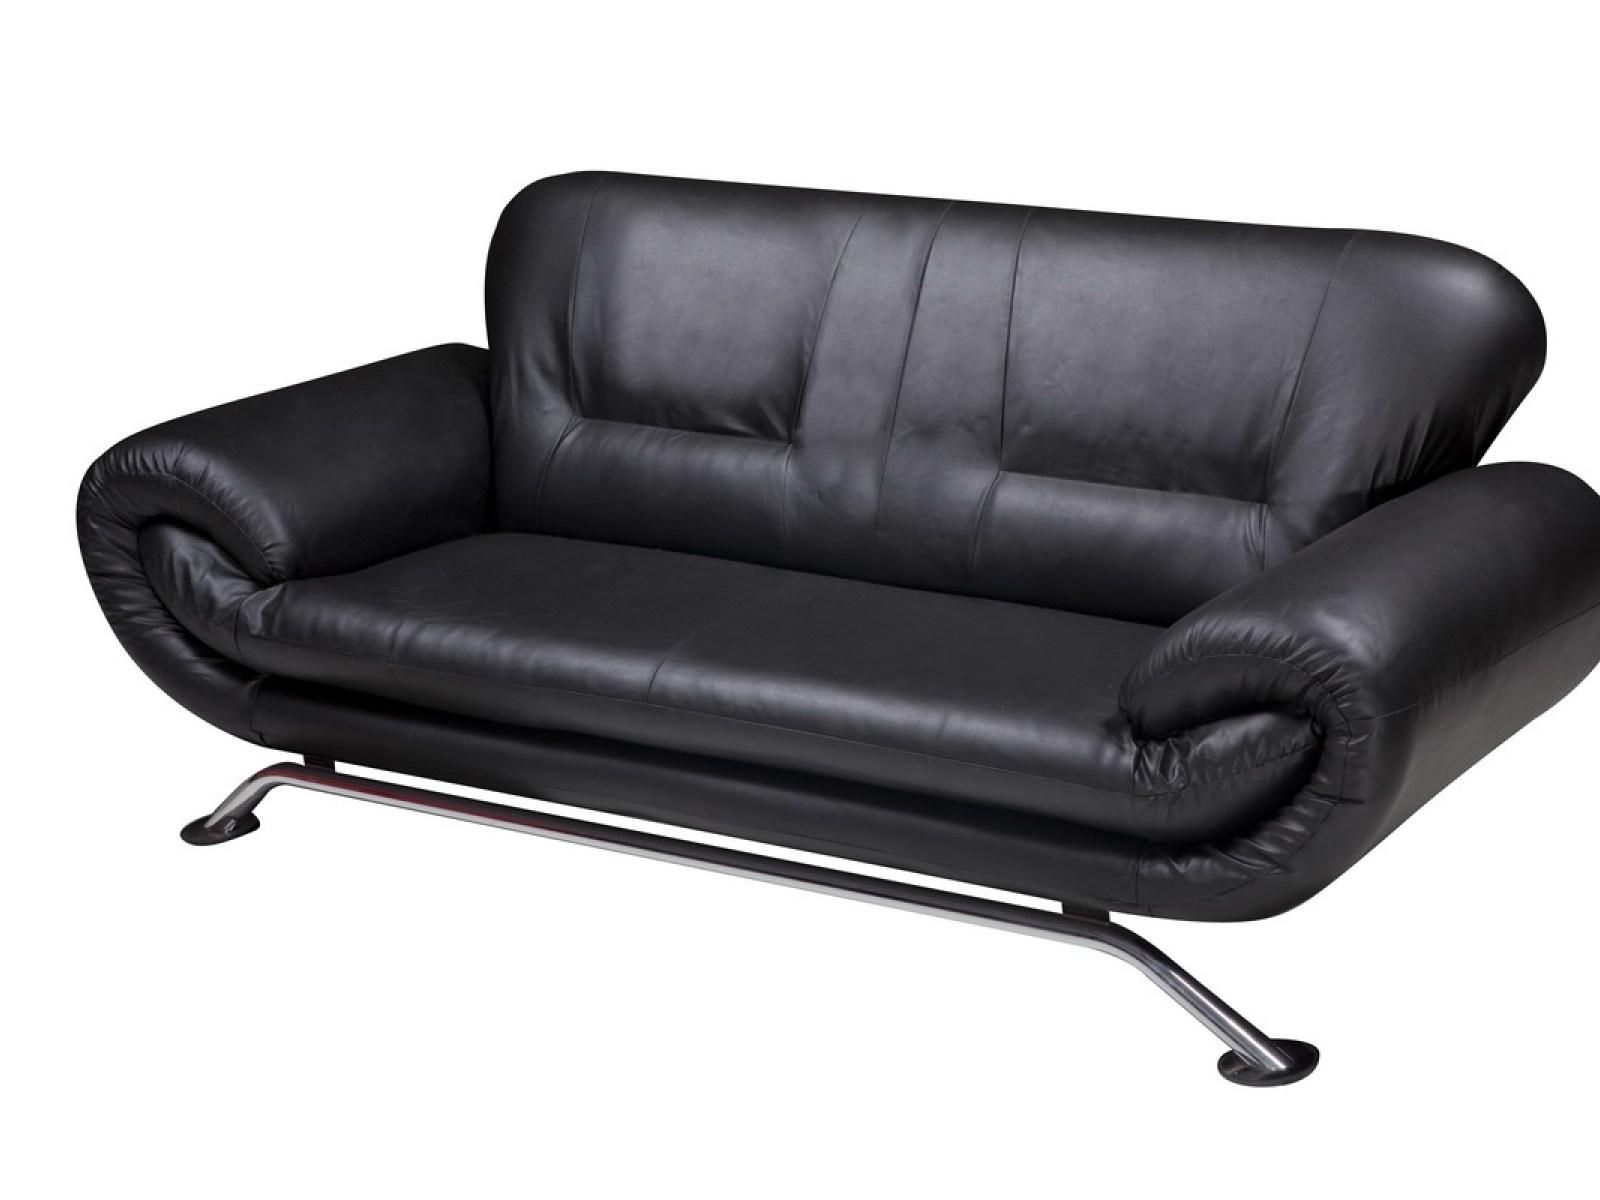 ▻ Sofa : 21 Lovely 3 Seater Also Black Chesterfield Sofa For Sale With 3 Seater Sofas For Sale (Photo 8 of 21)